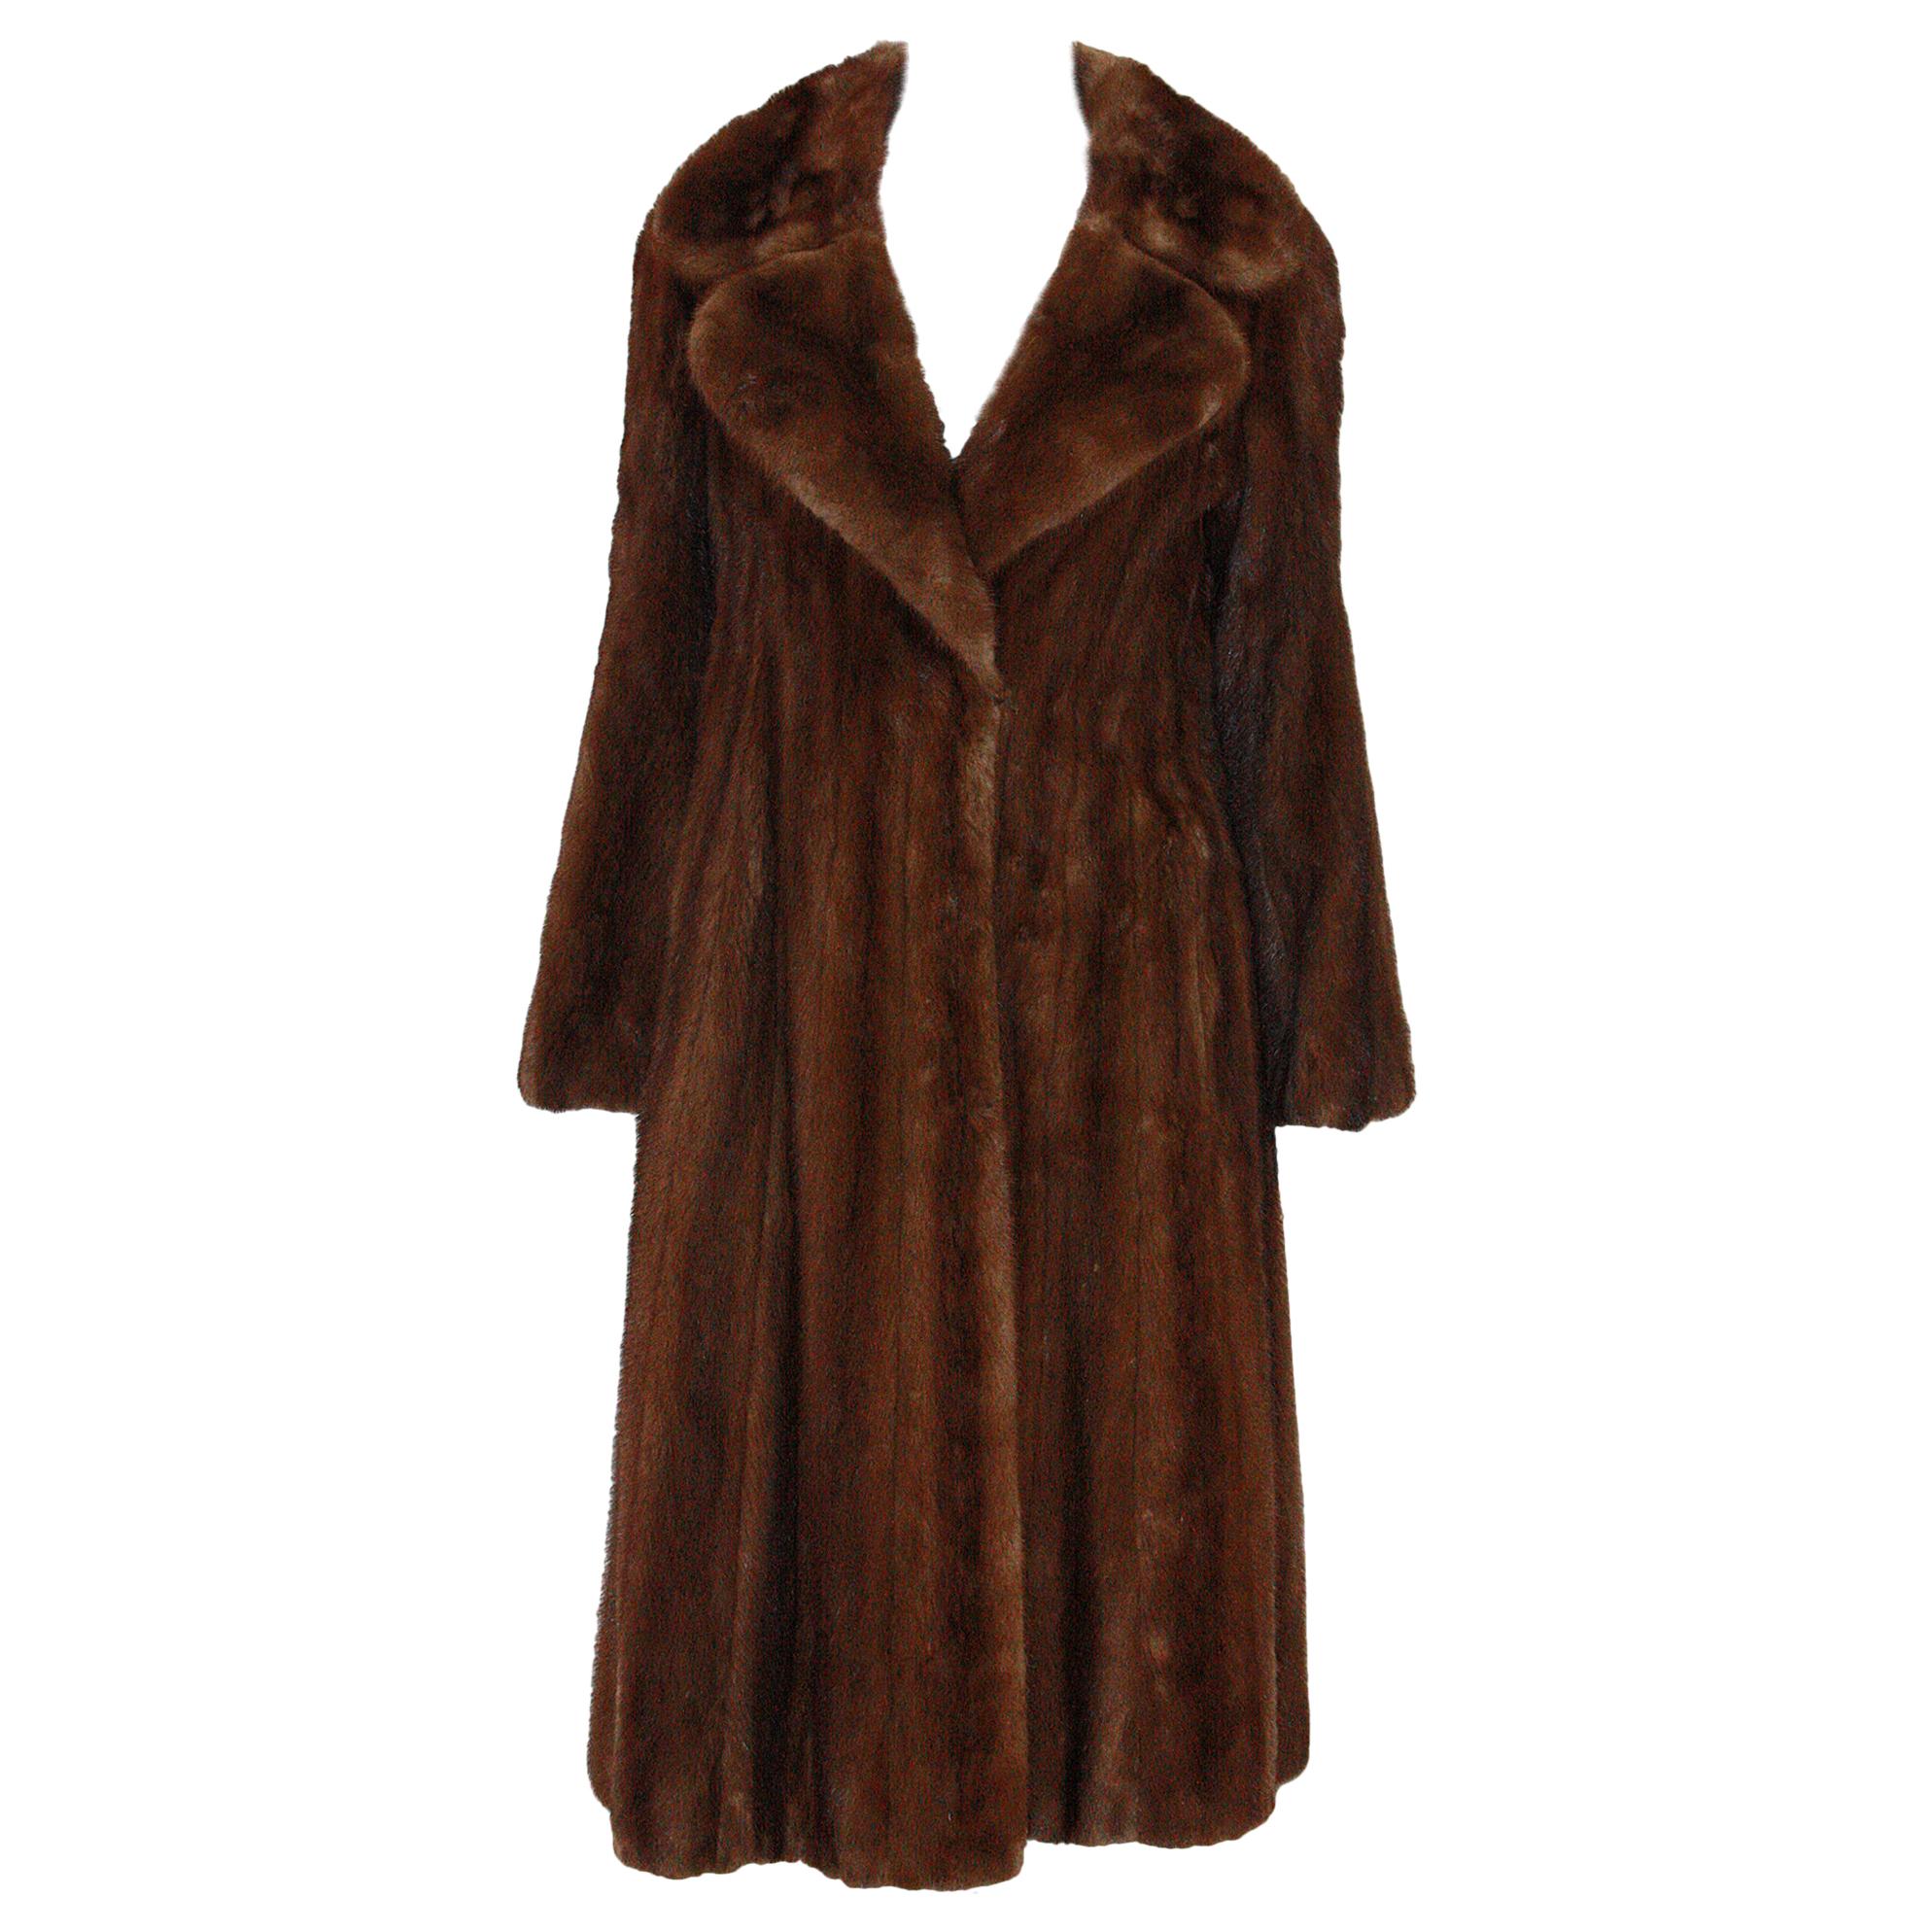 NORMAN NORELL for MICHAEL FORREST of New York sumptuous Natural Mink Coat